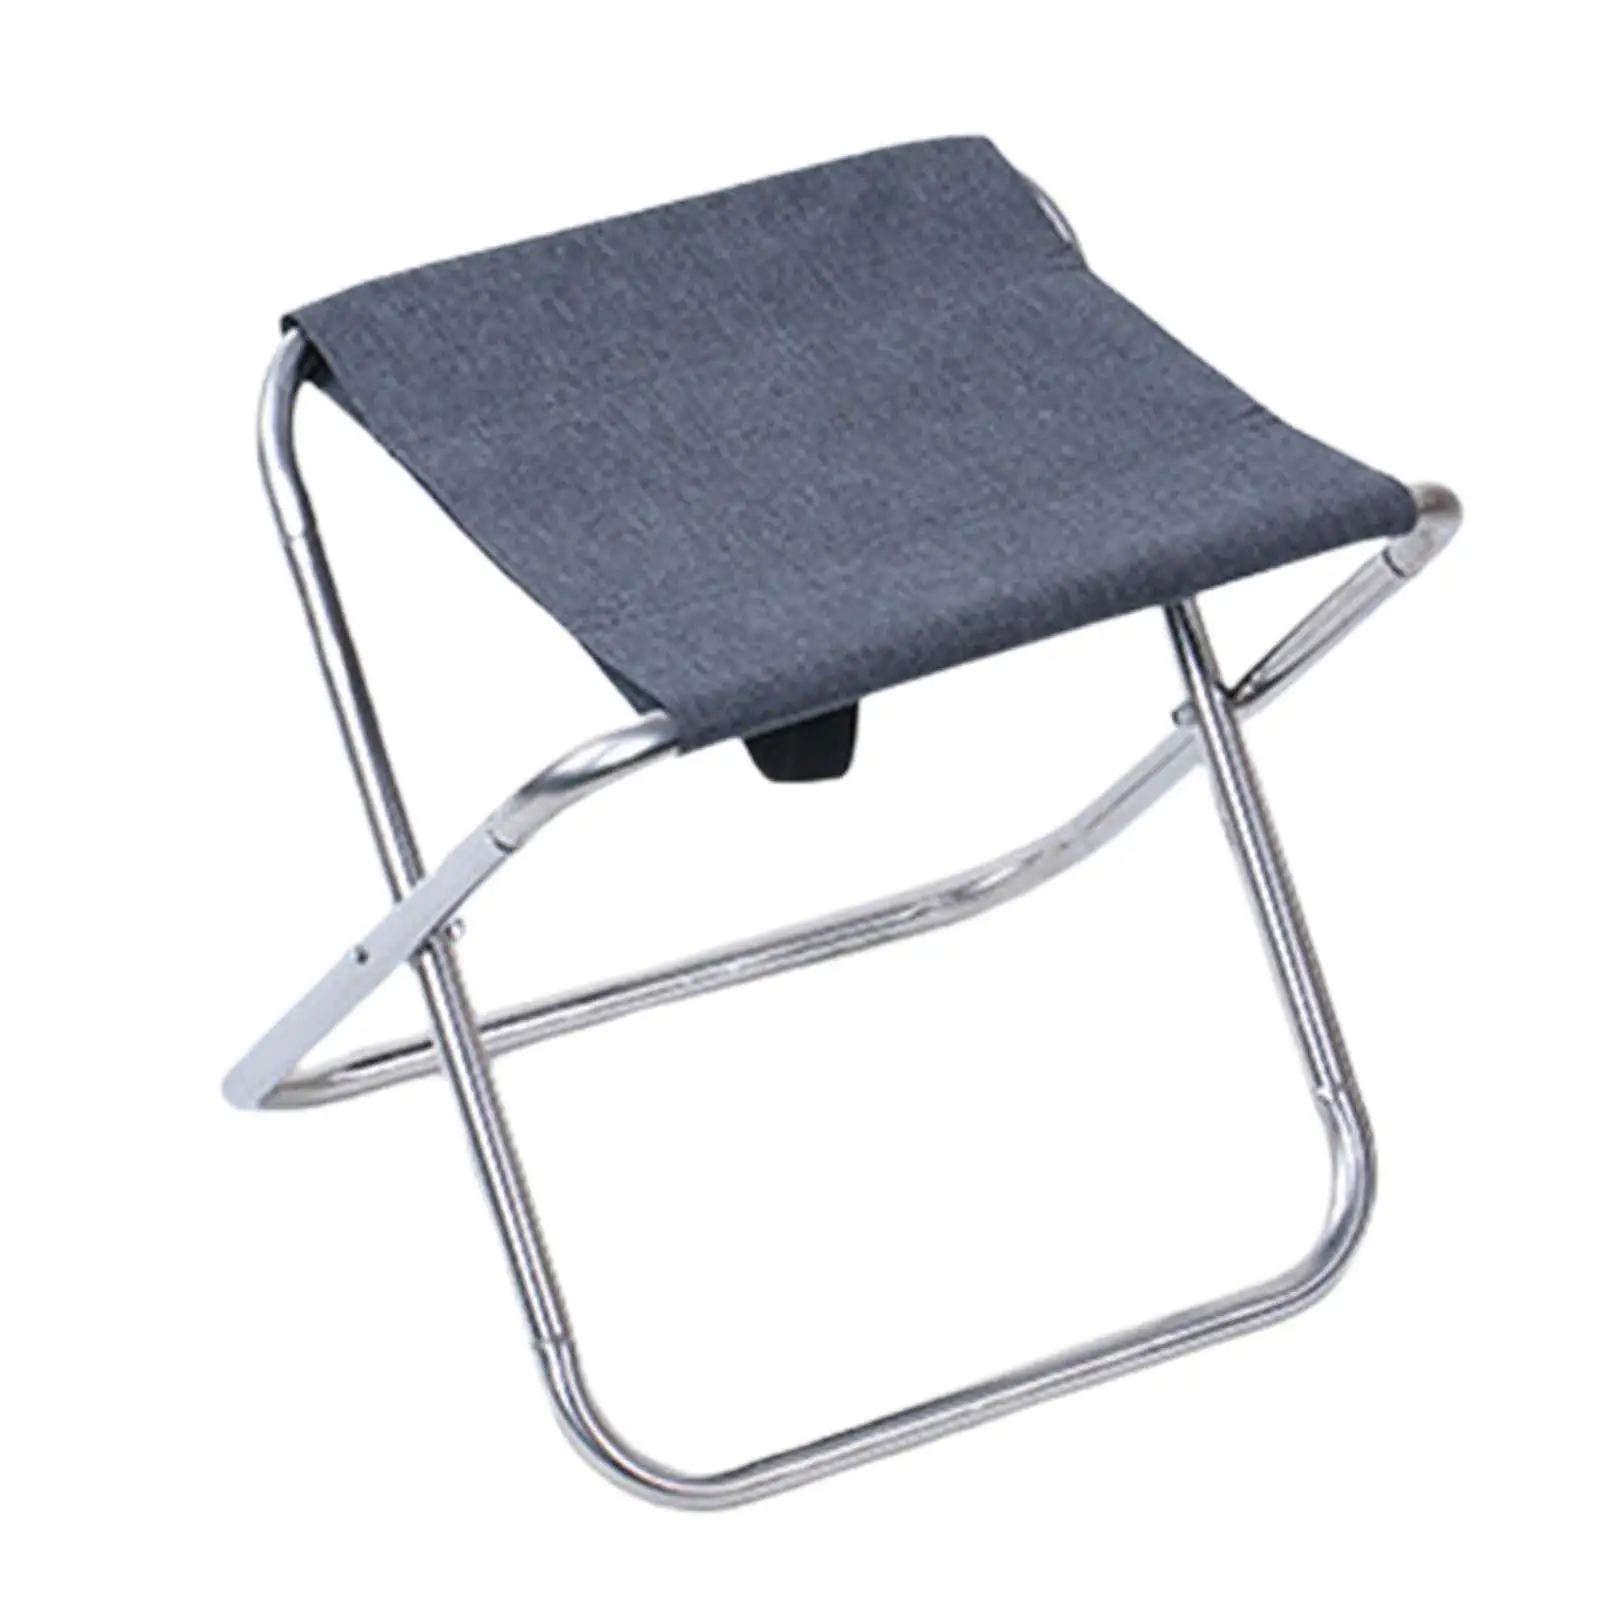 Folding Stool Camping Mini Collapsible Camping Chair Lightweight Camp Stool Portable for Park Barbecue Festival Sports Gardening